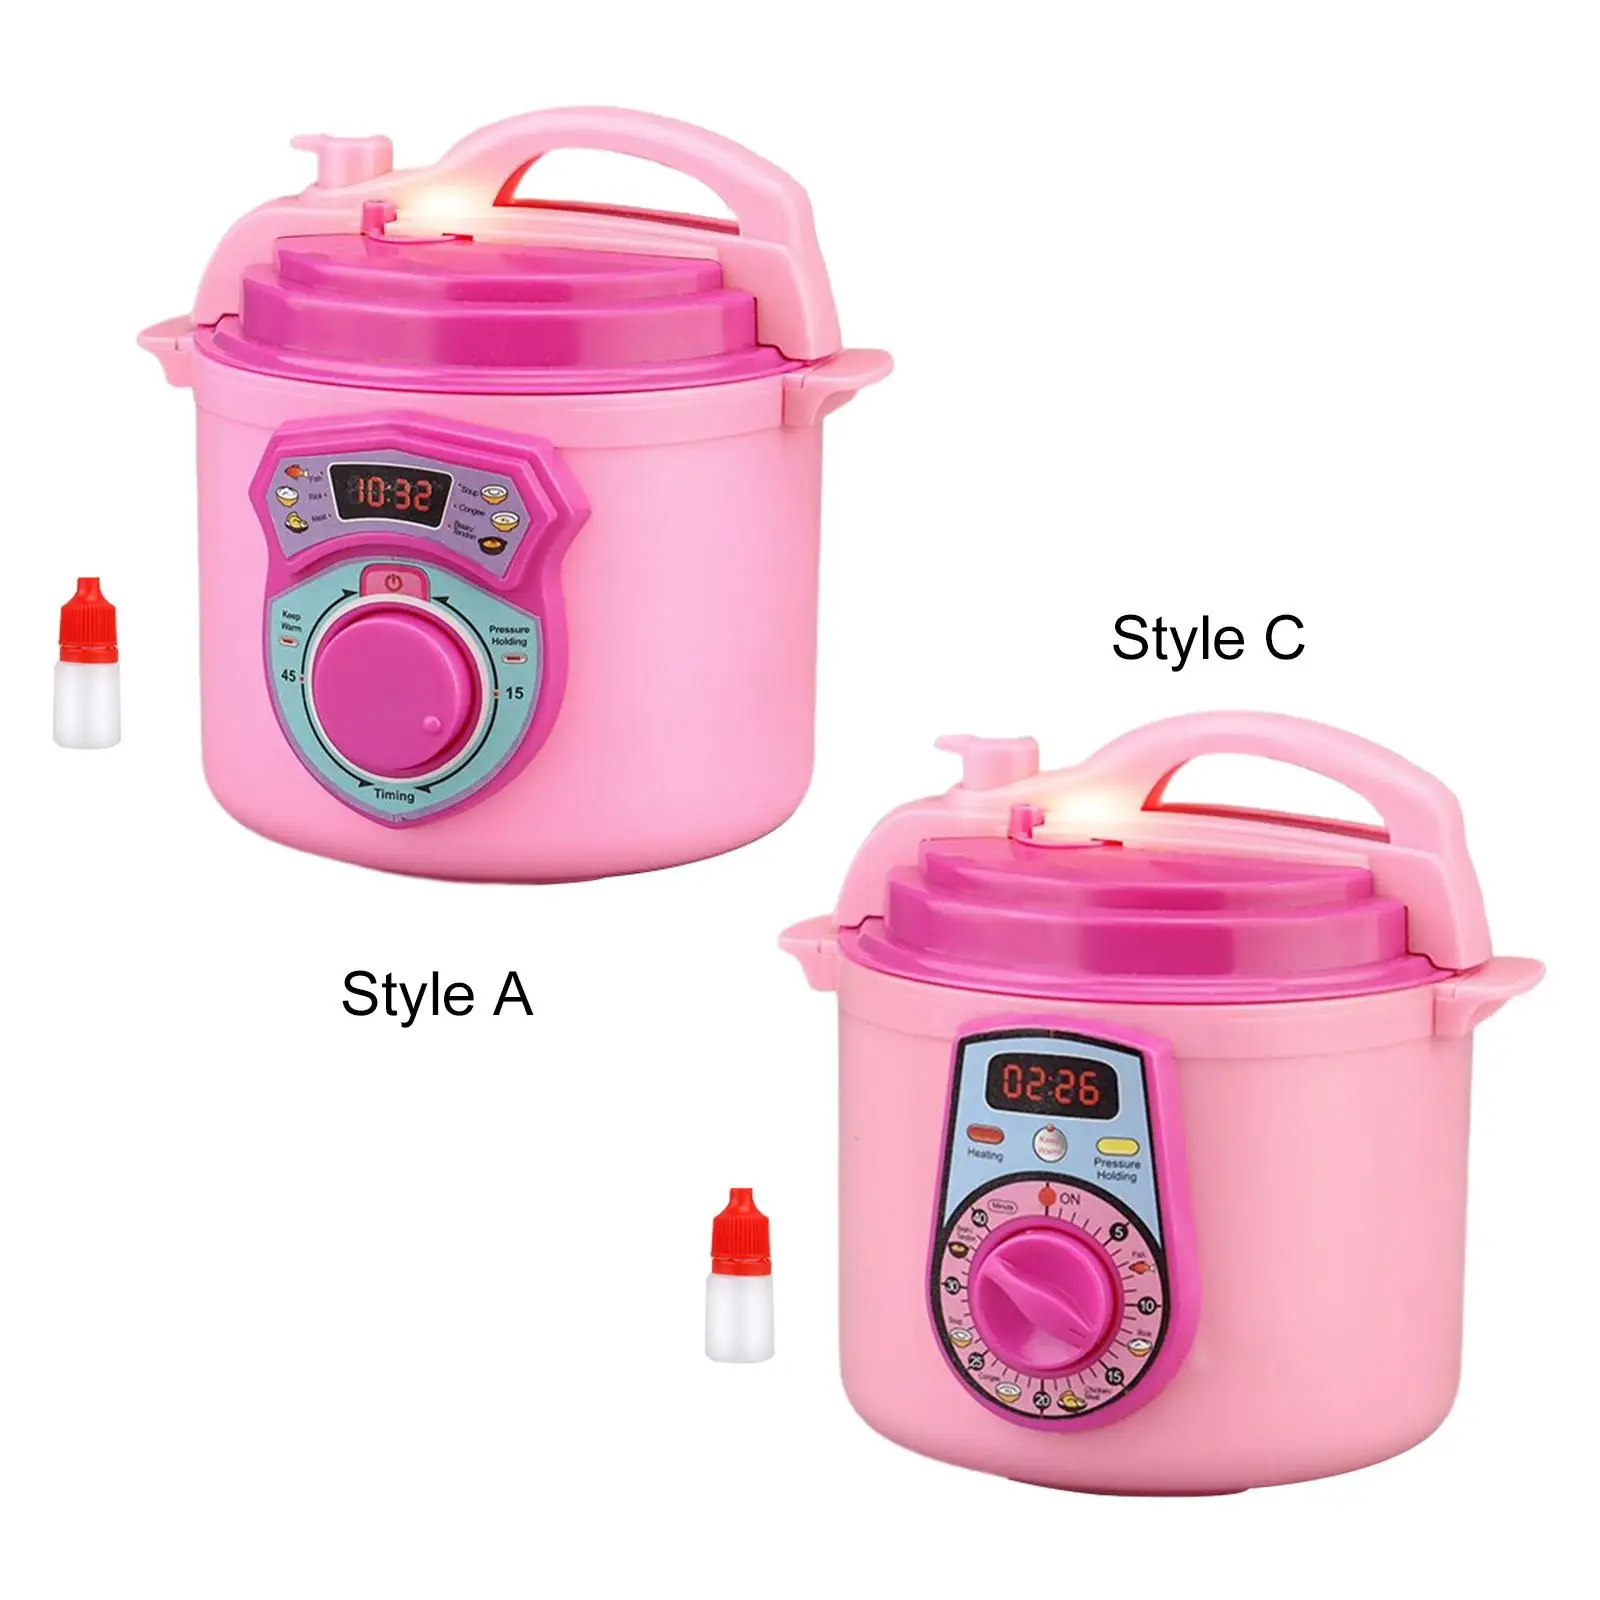 Electric Rice Cooker Toy Role Playing Toy Learning Educational Toy Mini with Lights Sound for Boy Children Girl